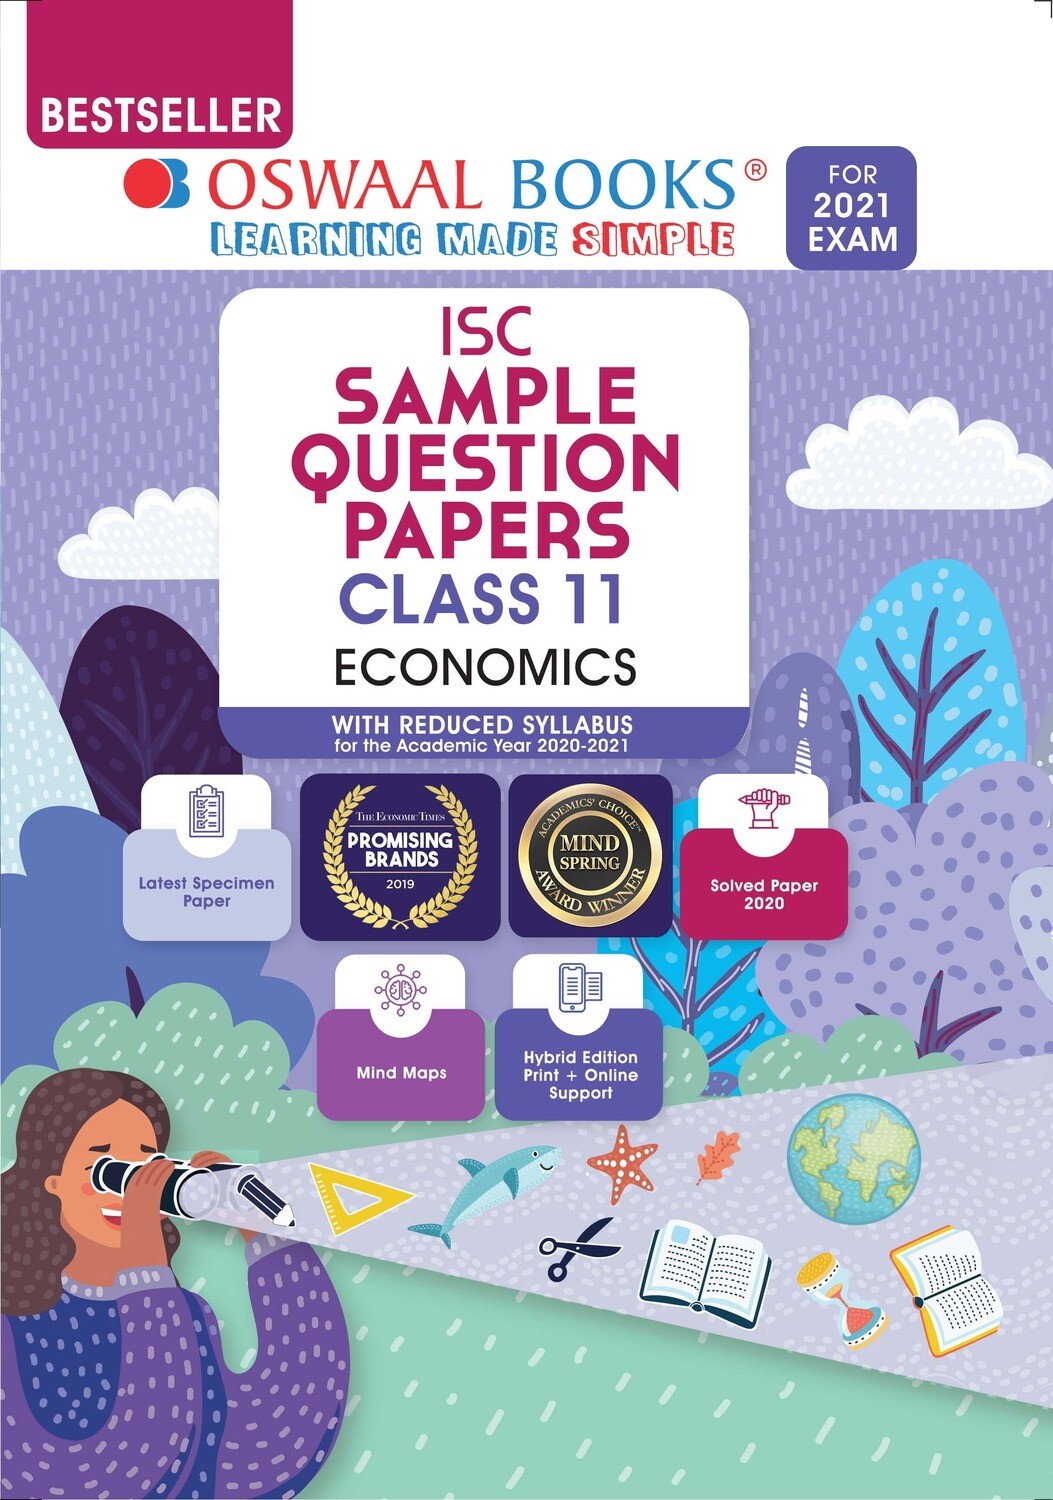 Buy e-book: Oswaal ISC Sample Question Paper Class 11 Economics Book (For 2021 Exam): 9789354230653